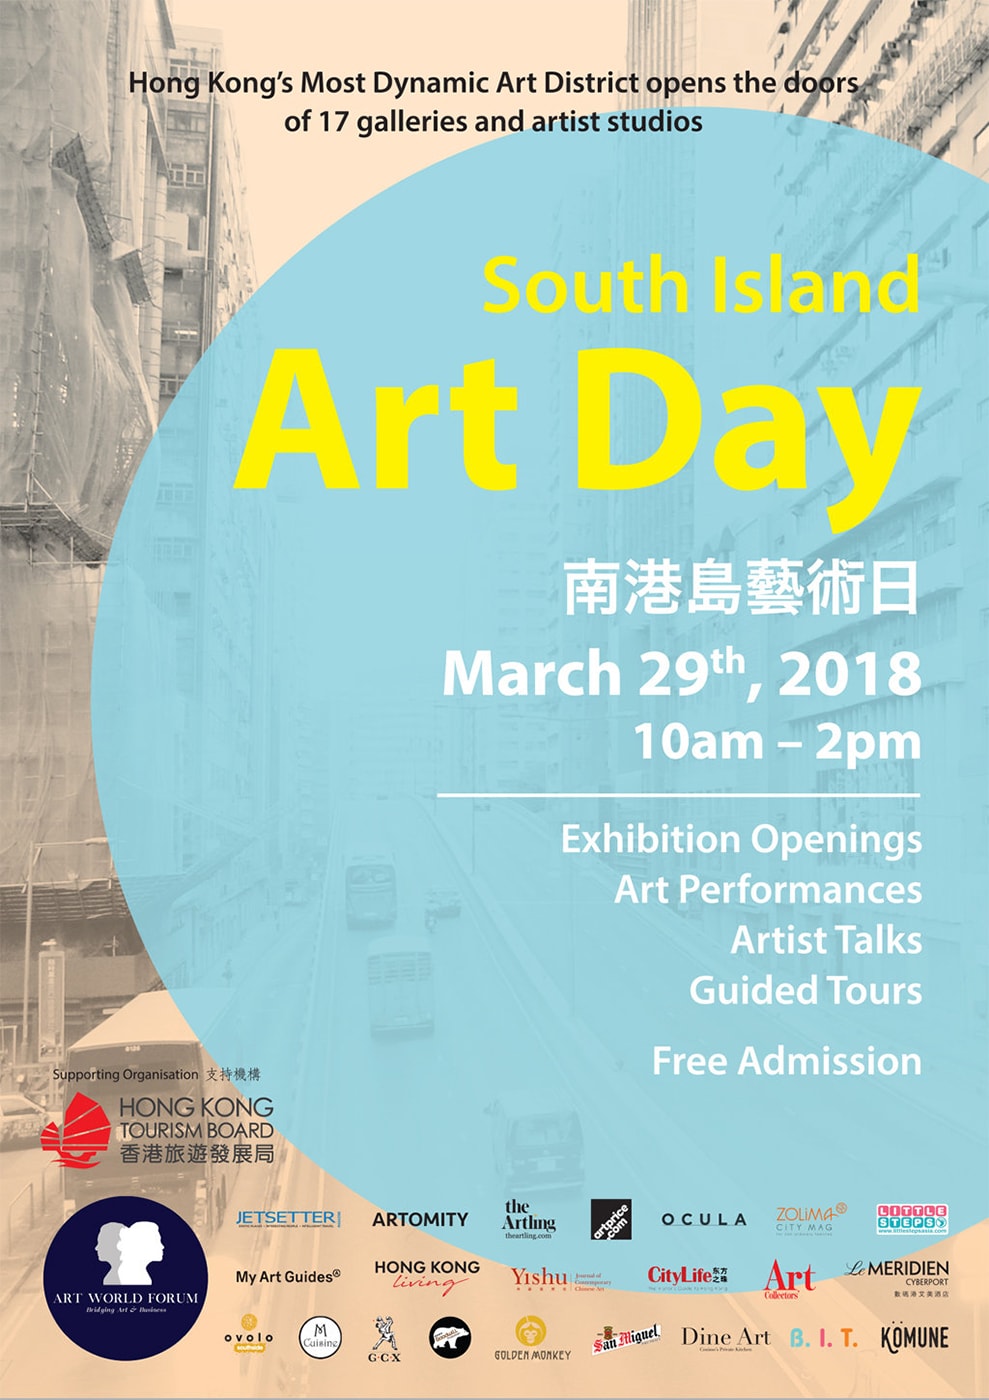 South Island Art Day will take place on Thursday, March 29, from 10am – 2pm